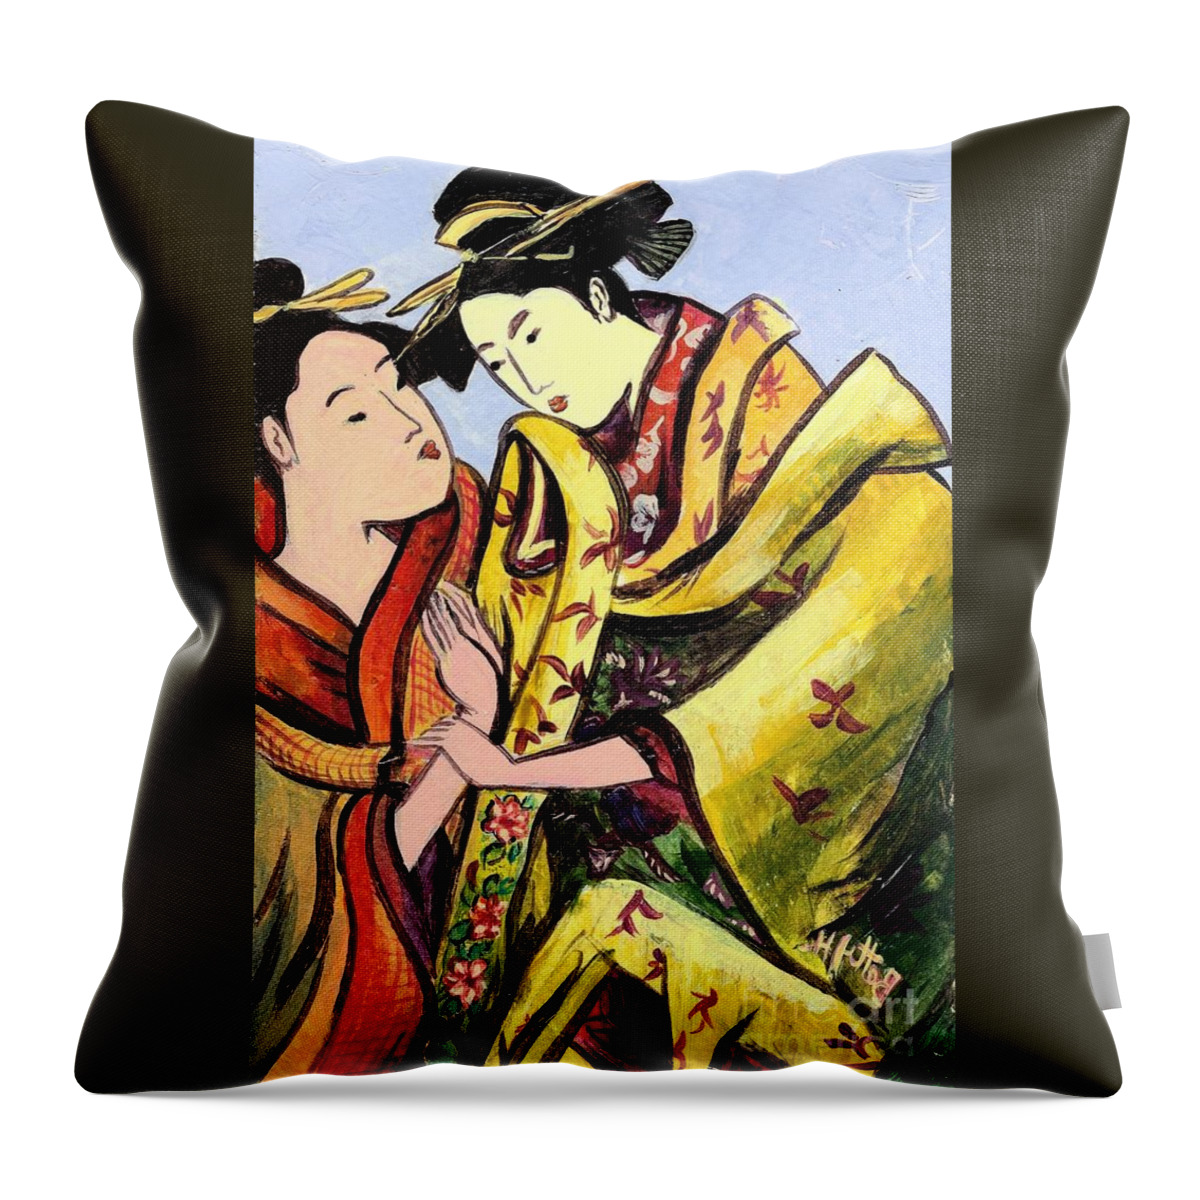 Colorful Throw Pillow featuring the painting Understanding by Elisabeta Hermann